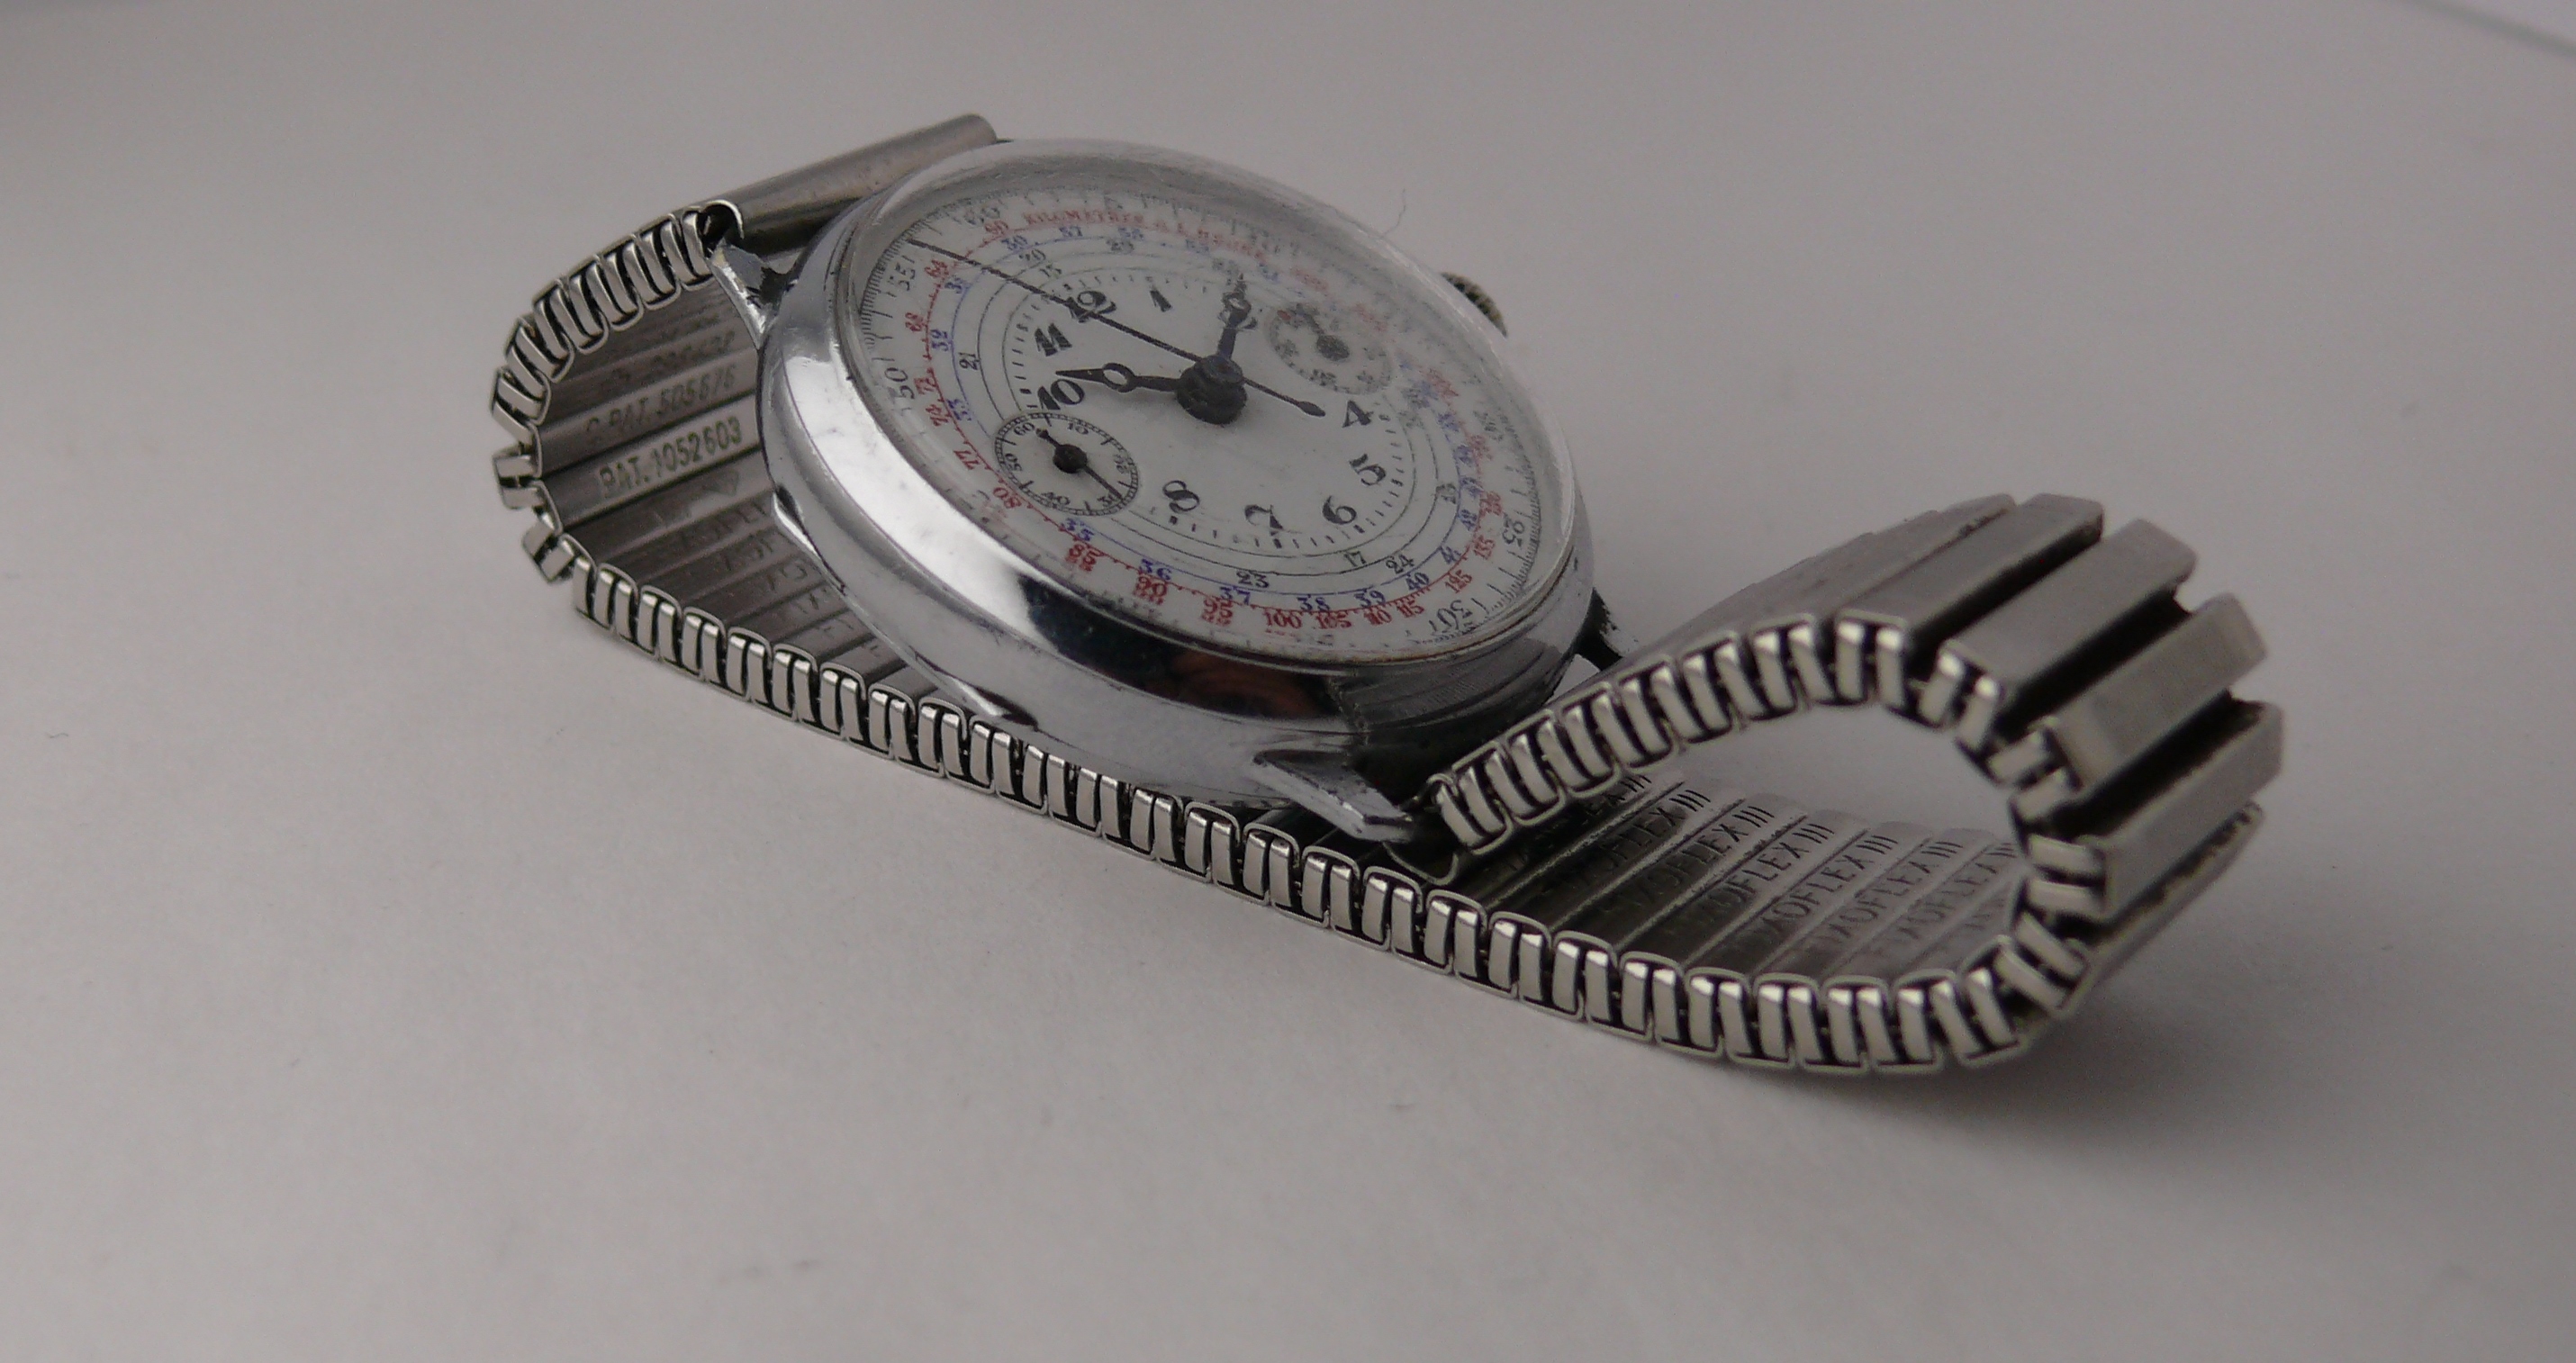 Vintage Porcelain Enamel Dial Monopusher Chronograph Wristwatch Circa 1940s, well preserved - Image 7 of 12